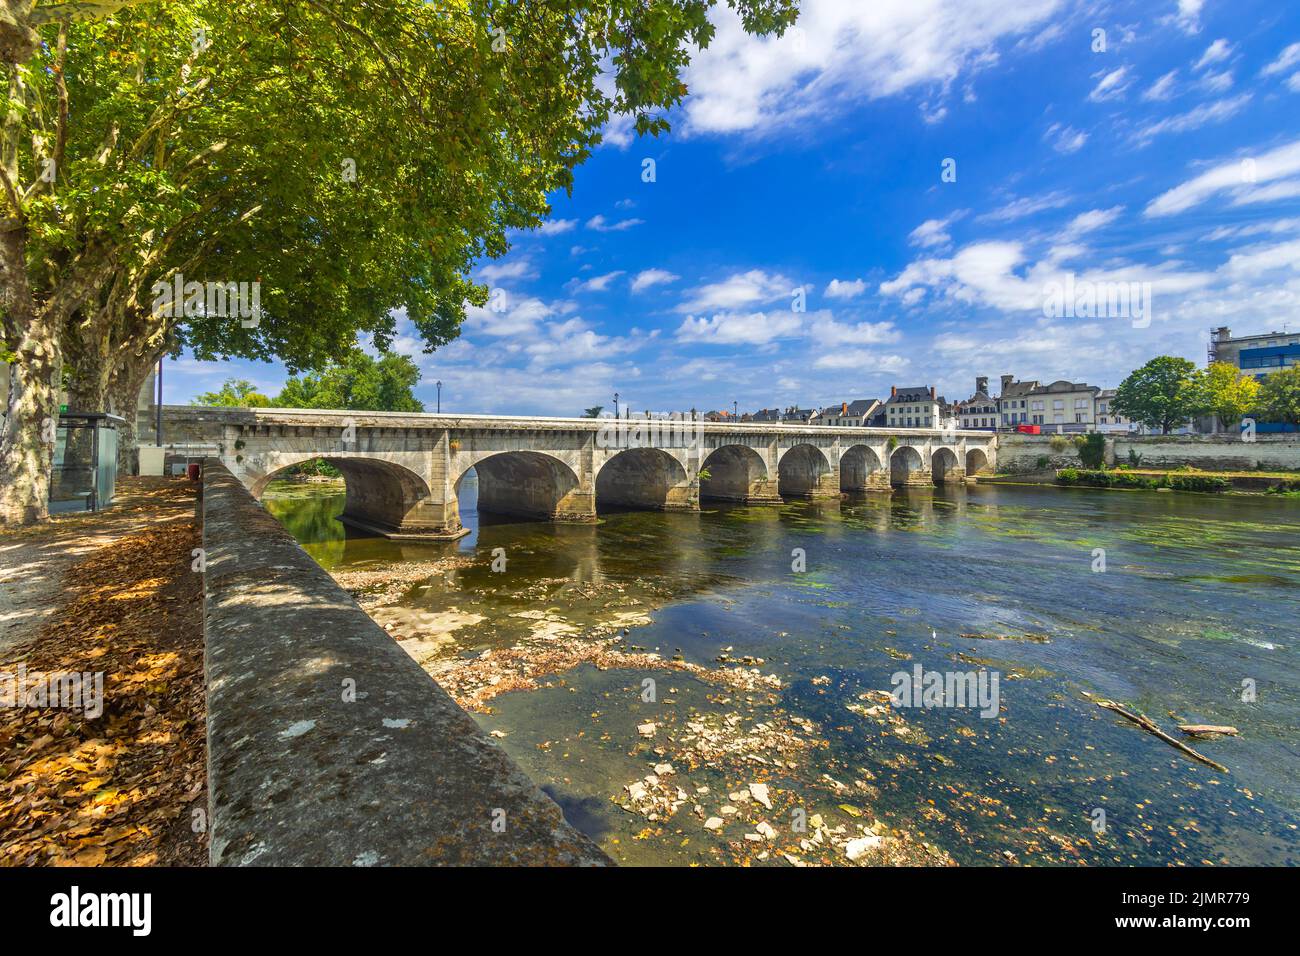 Late 16th century Pont Henri IV arched multi-bridge crossing the river Vienne in Chatellerault, Vienne (86), France. Stock Photo